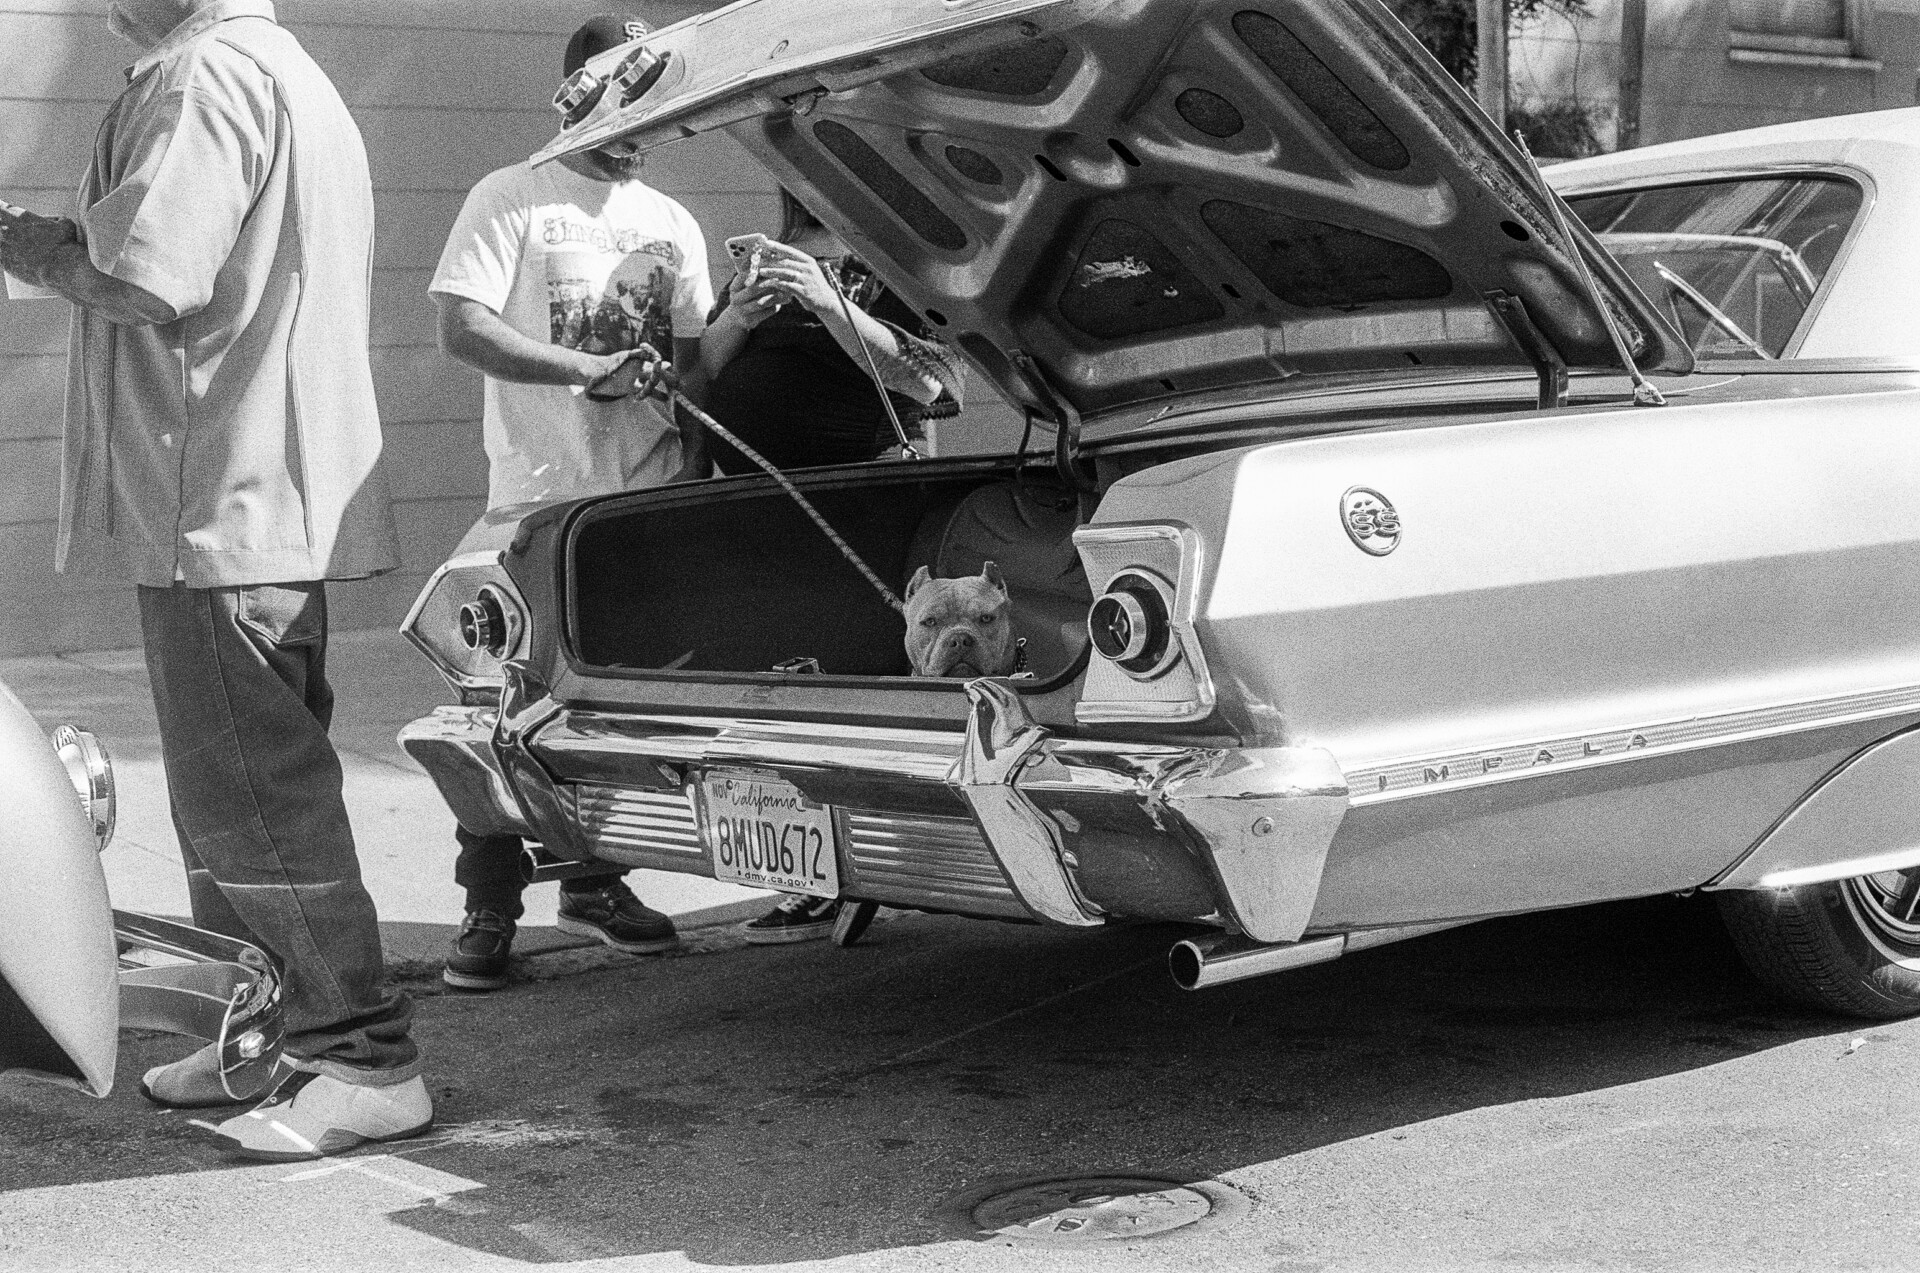 A pitbull chills in the open trunk of a low rider car with his owner and a few friends standing around.